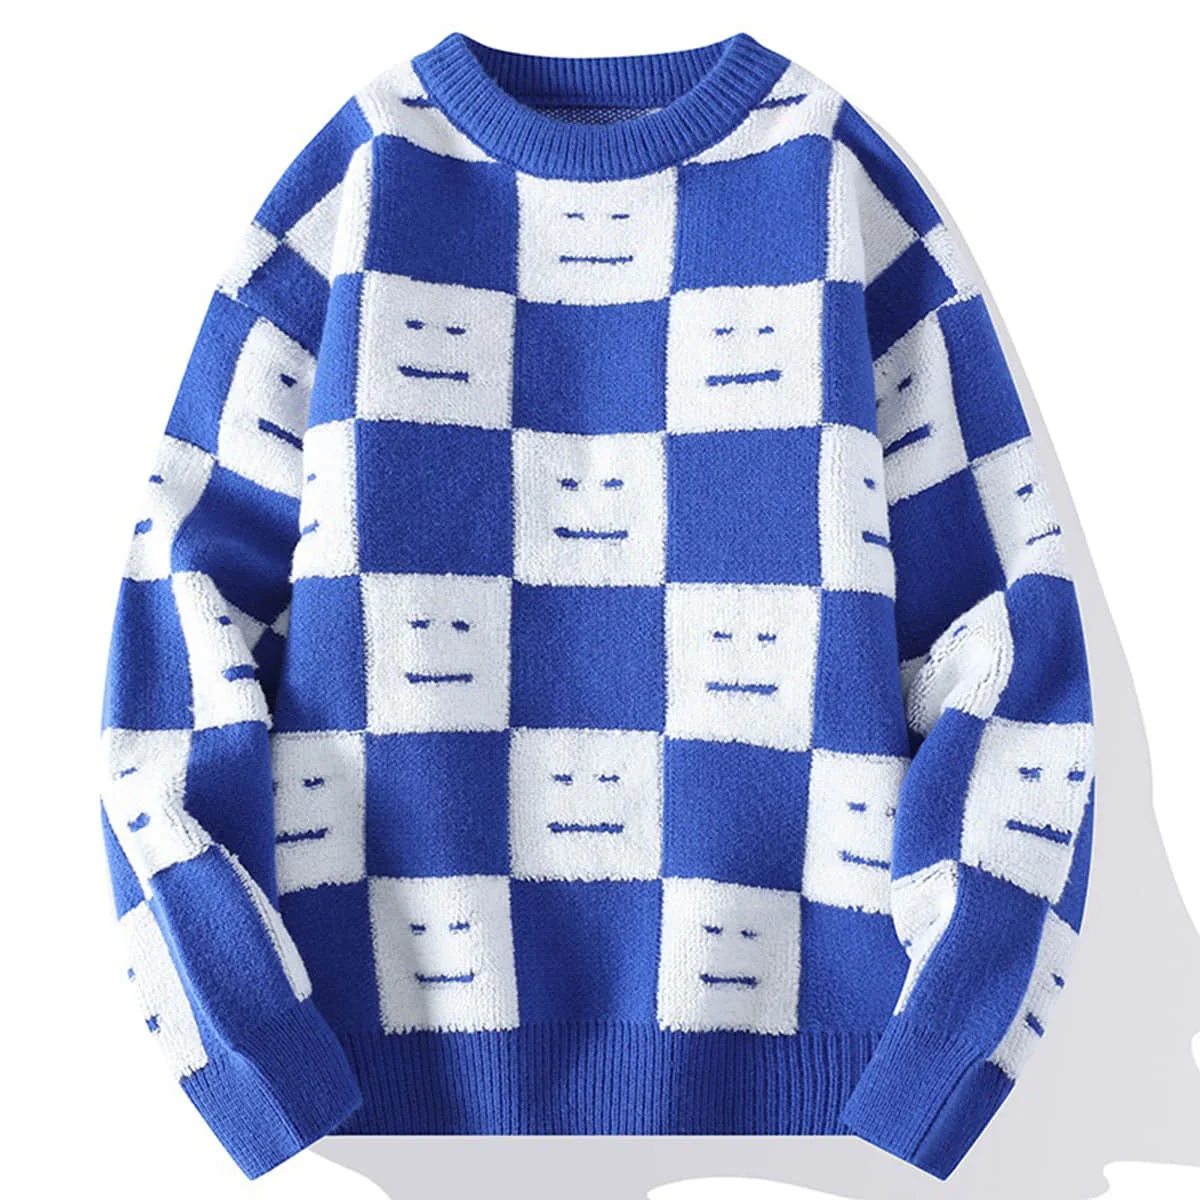 Mens Pullovers Luxury Studios Brand AC Sweaters Males Smile Jacquard Weave O-Neck Striped Clothing Warm Pullover Fashion